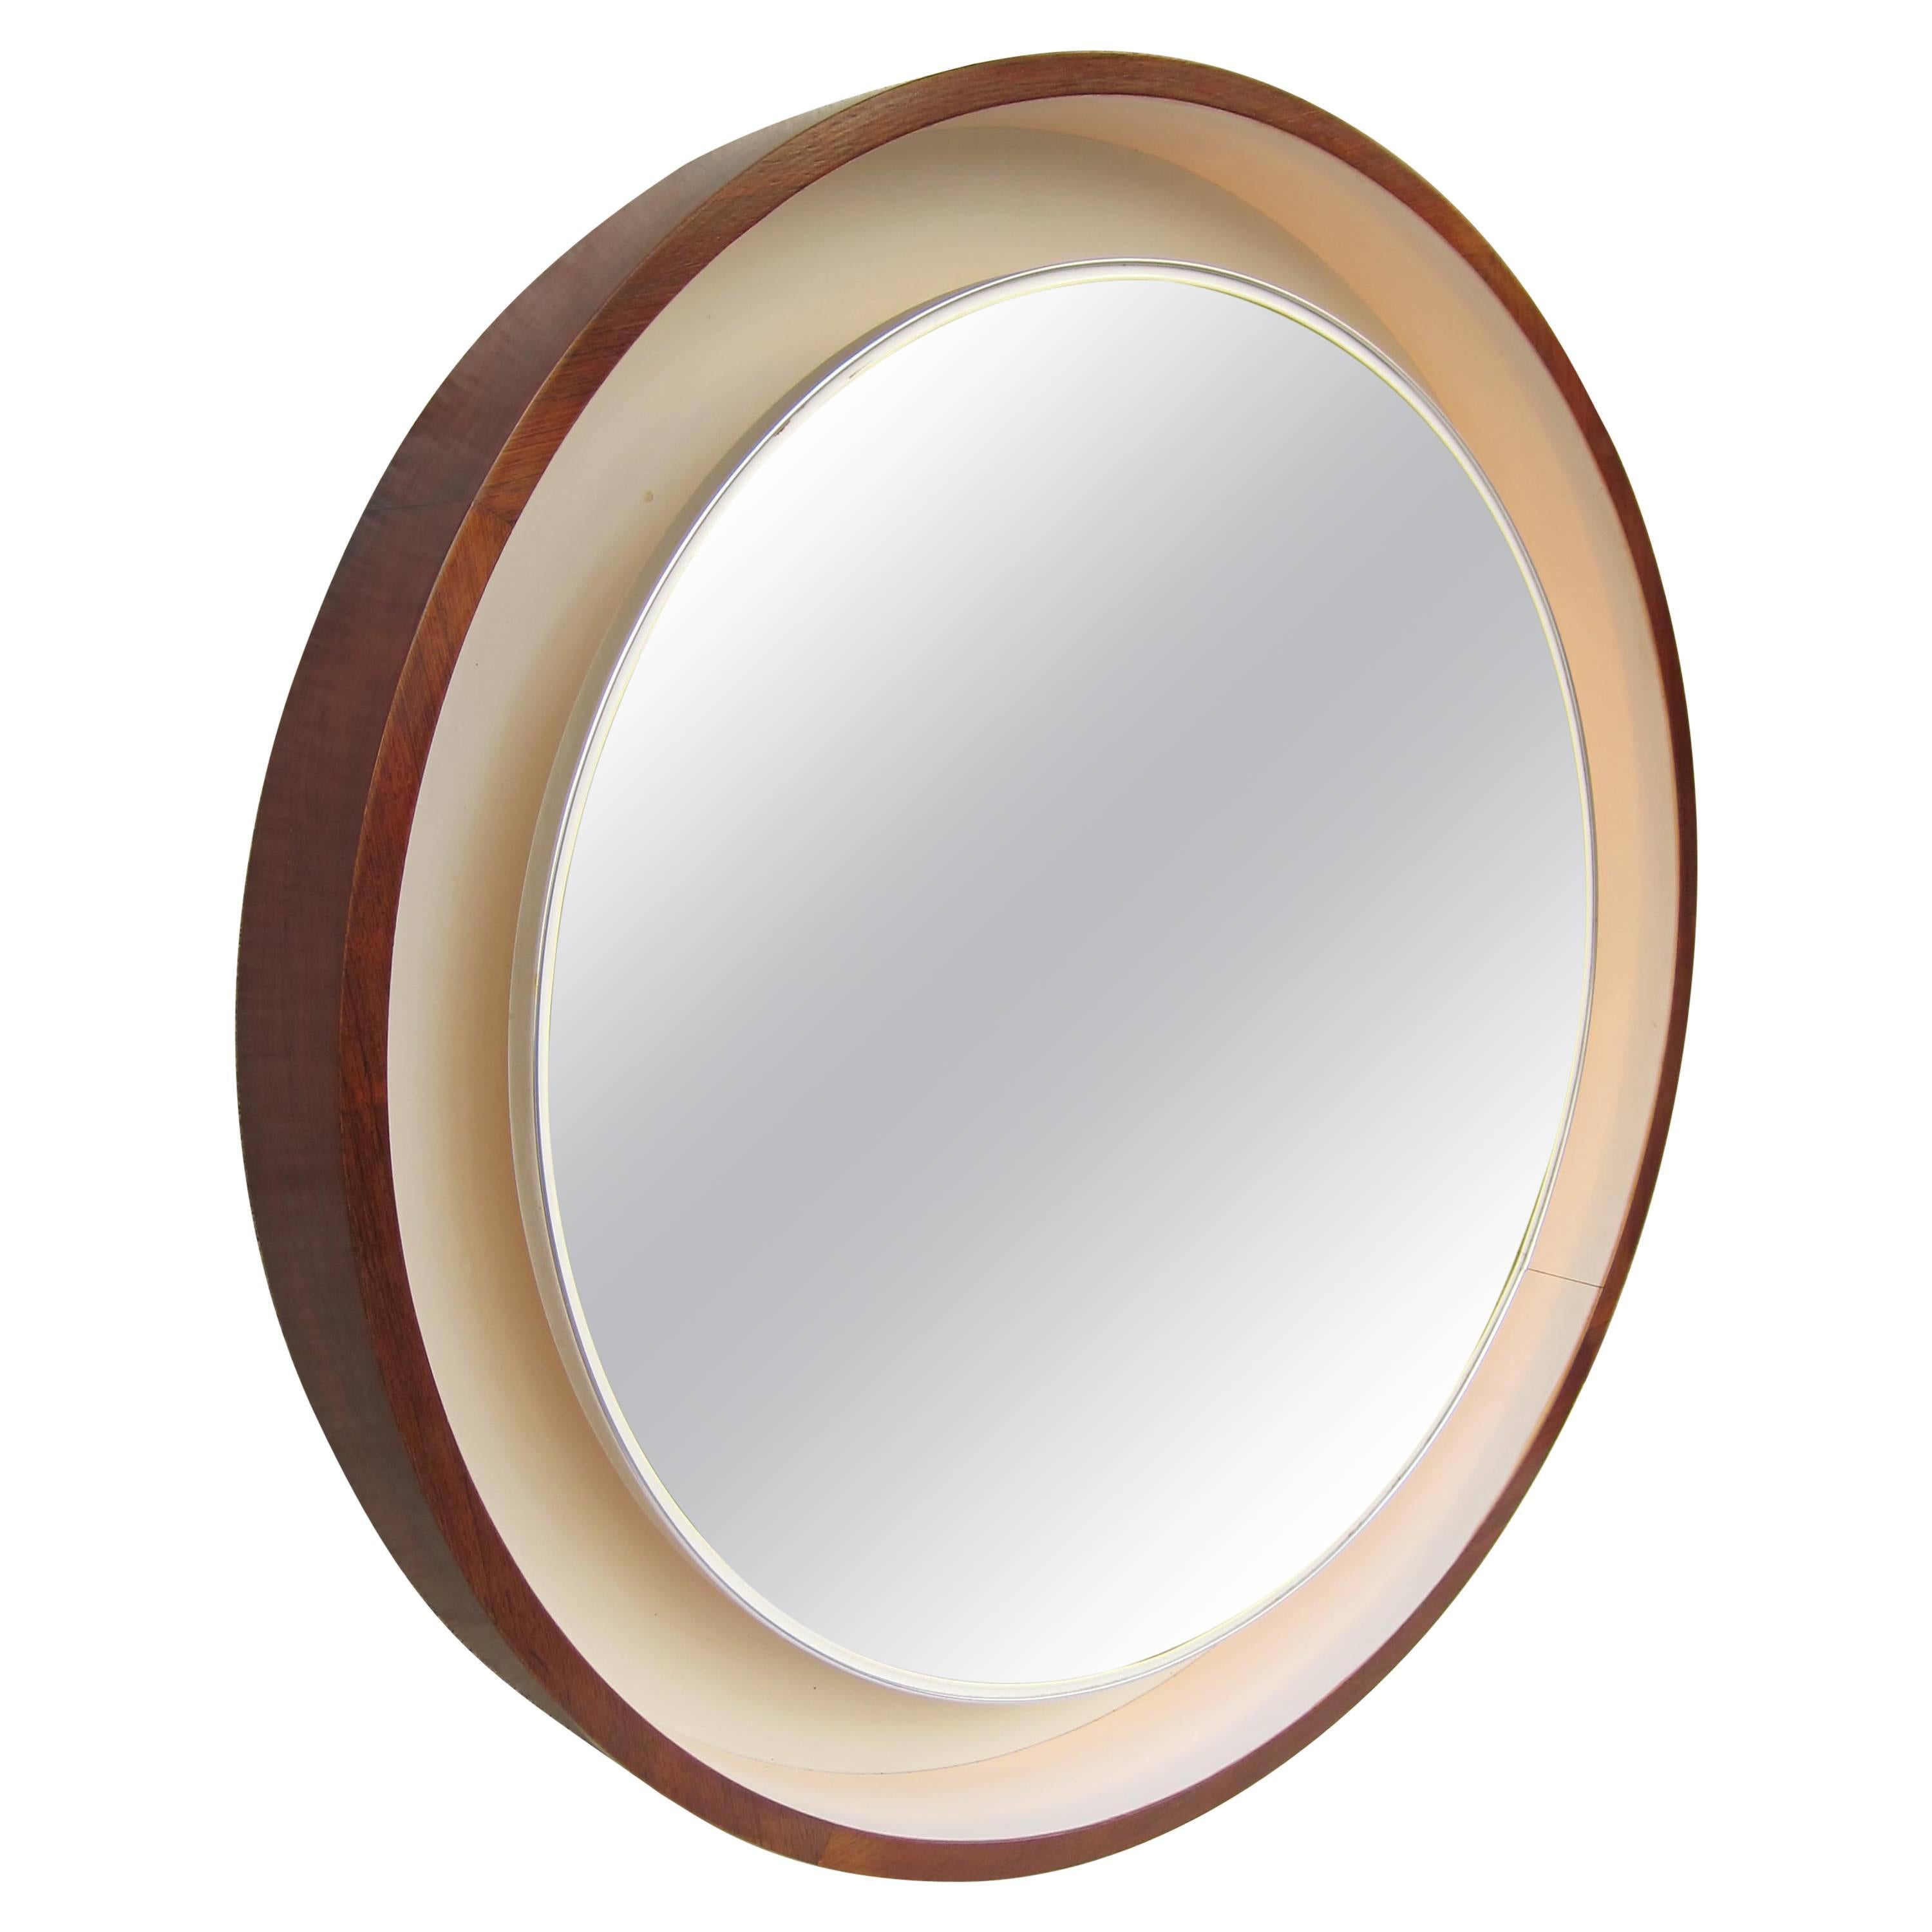 Rosewood and Lacquer with Light Mirror, Scandinavia, 1970 For Sale